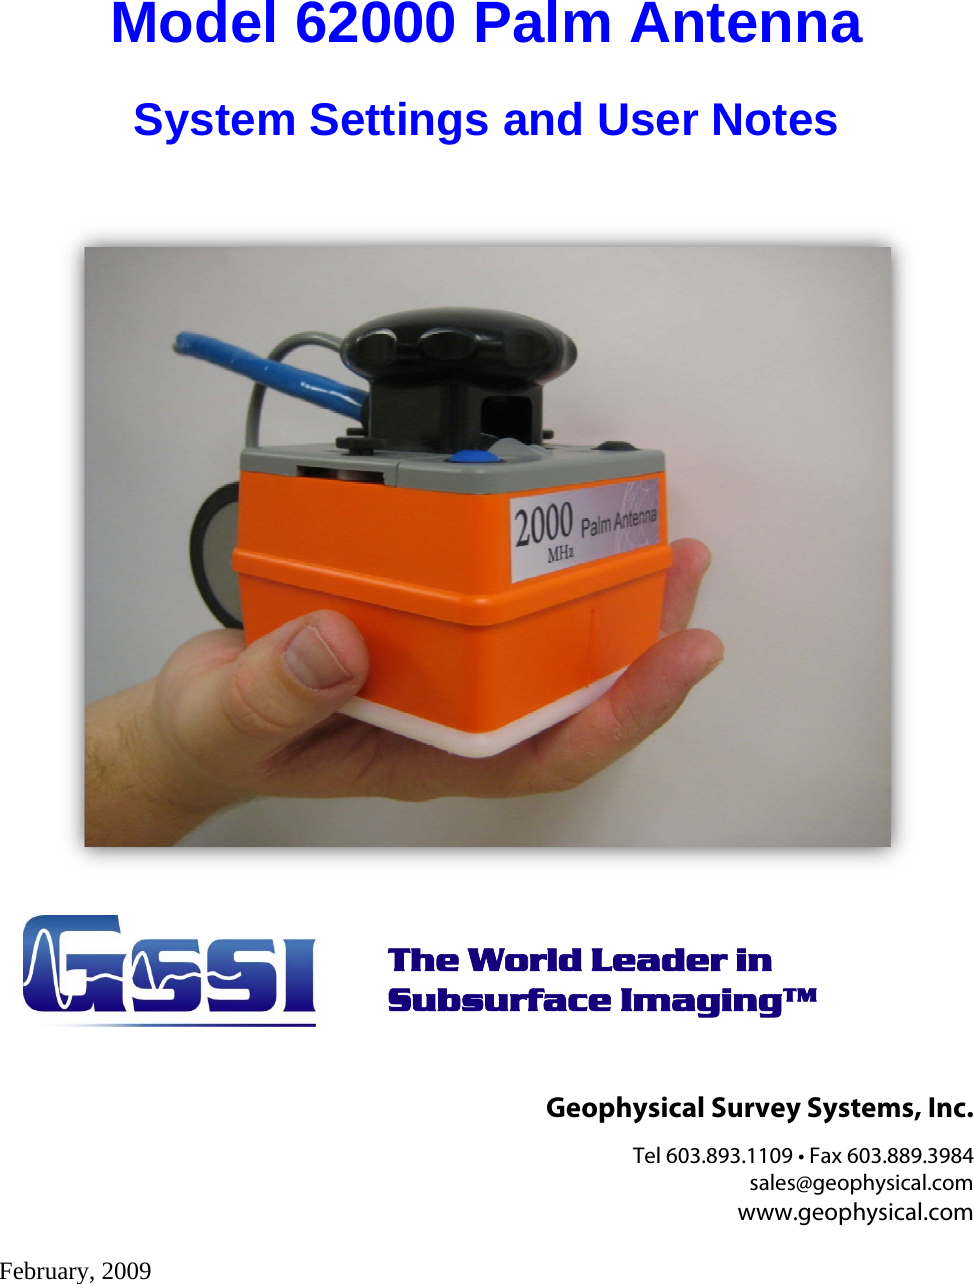 Model 62000 Palm Antenna System Settings and User Notes       The World Leader in  Subsurface Imaging™  Geophysical Survey Systems, Inc. Tel 603.893.1109 • Fax 603.889.3984 sales@geophysical.com www.geophysical.com  February, 2009   